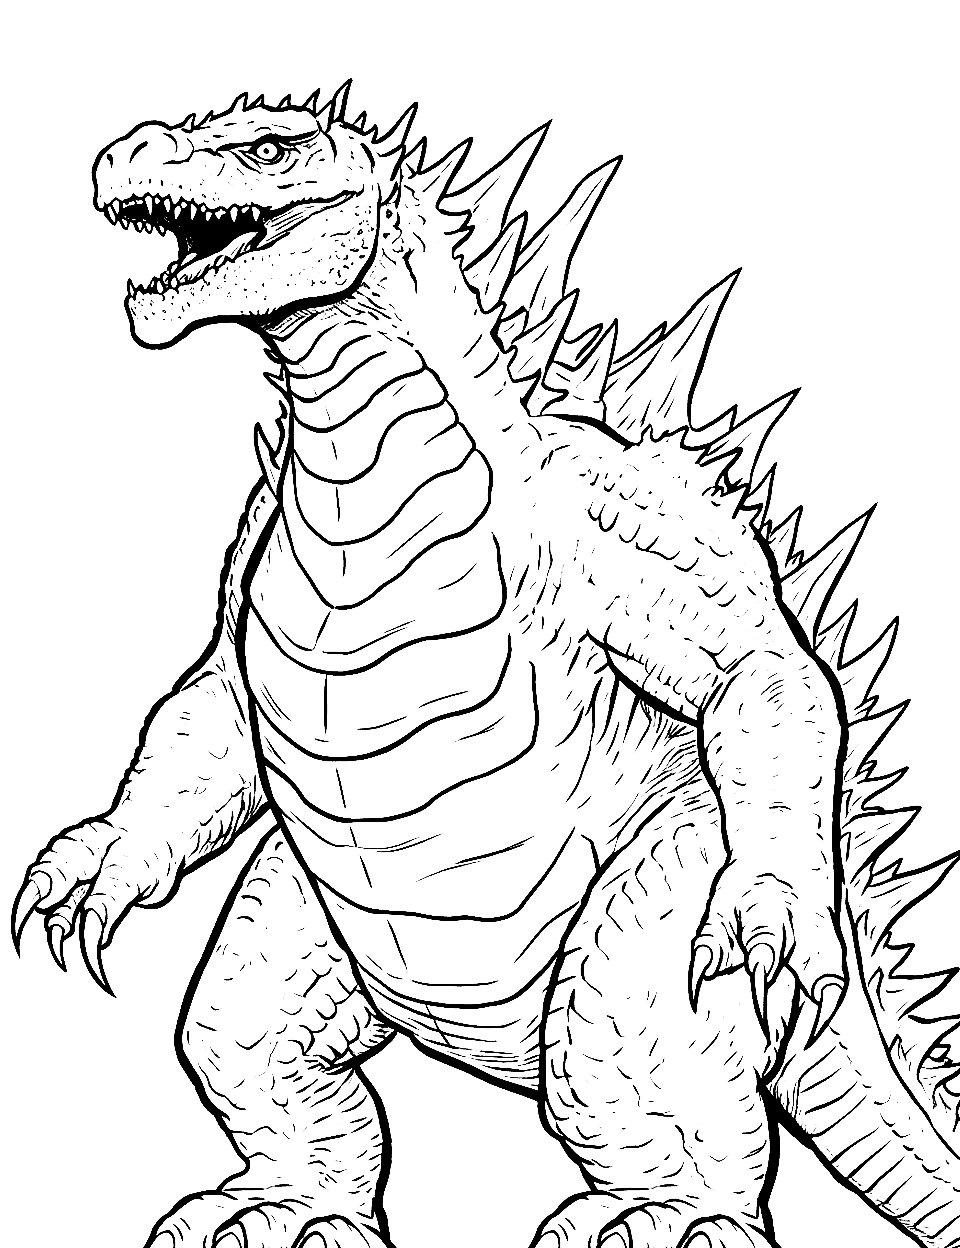 Realistic Godzilla Portrait Coloring Page - A lifelike depiction of Godzilla, showcasing its massive size and detailed scales.